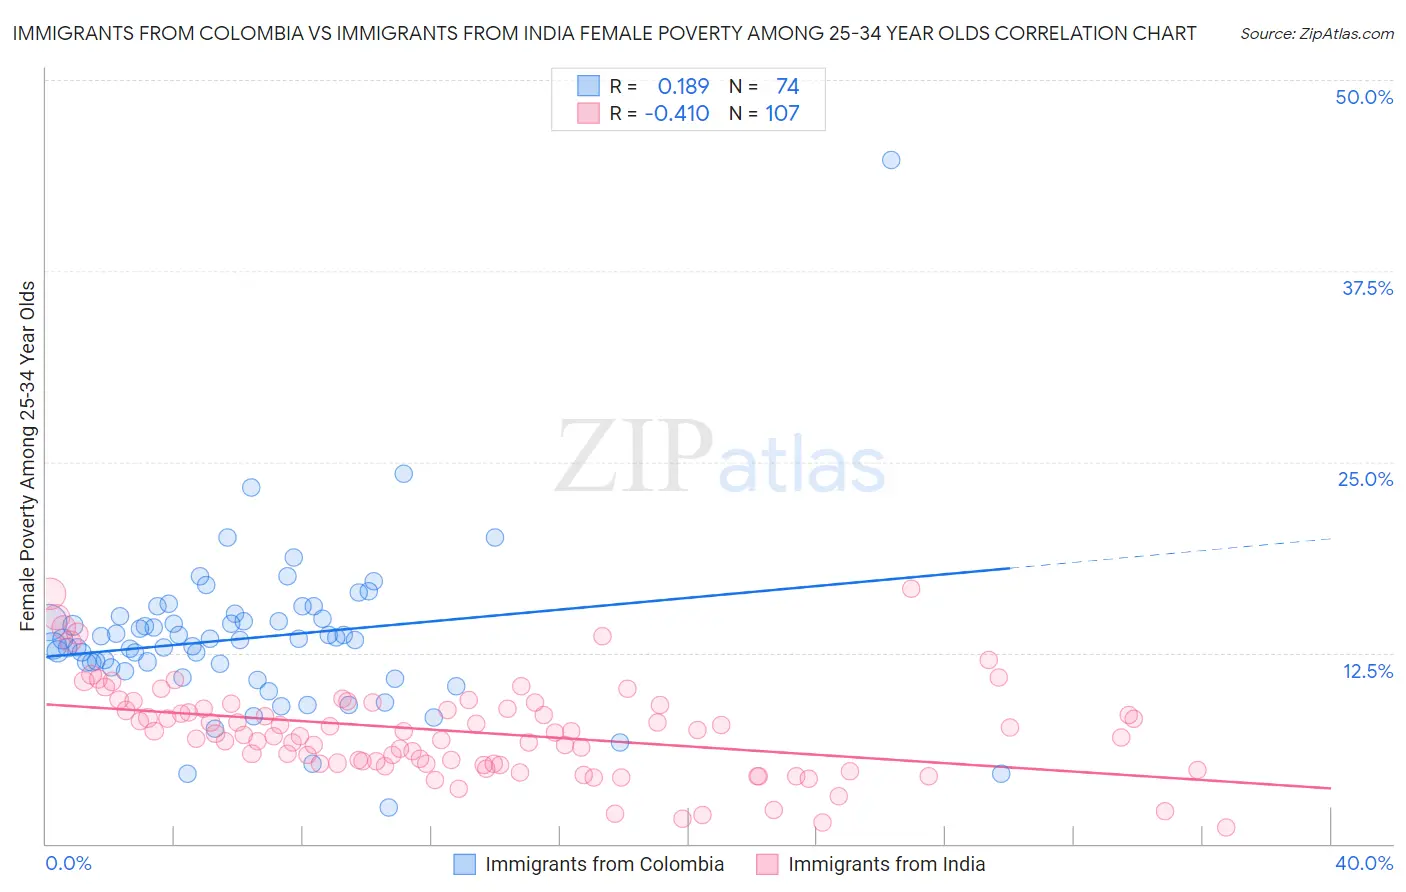 Immigrants from Colombia vs Immigrants from India Female Poverty Among 25-34 Year Olds